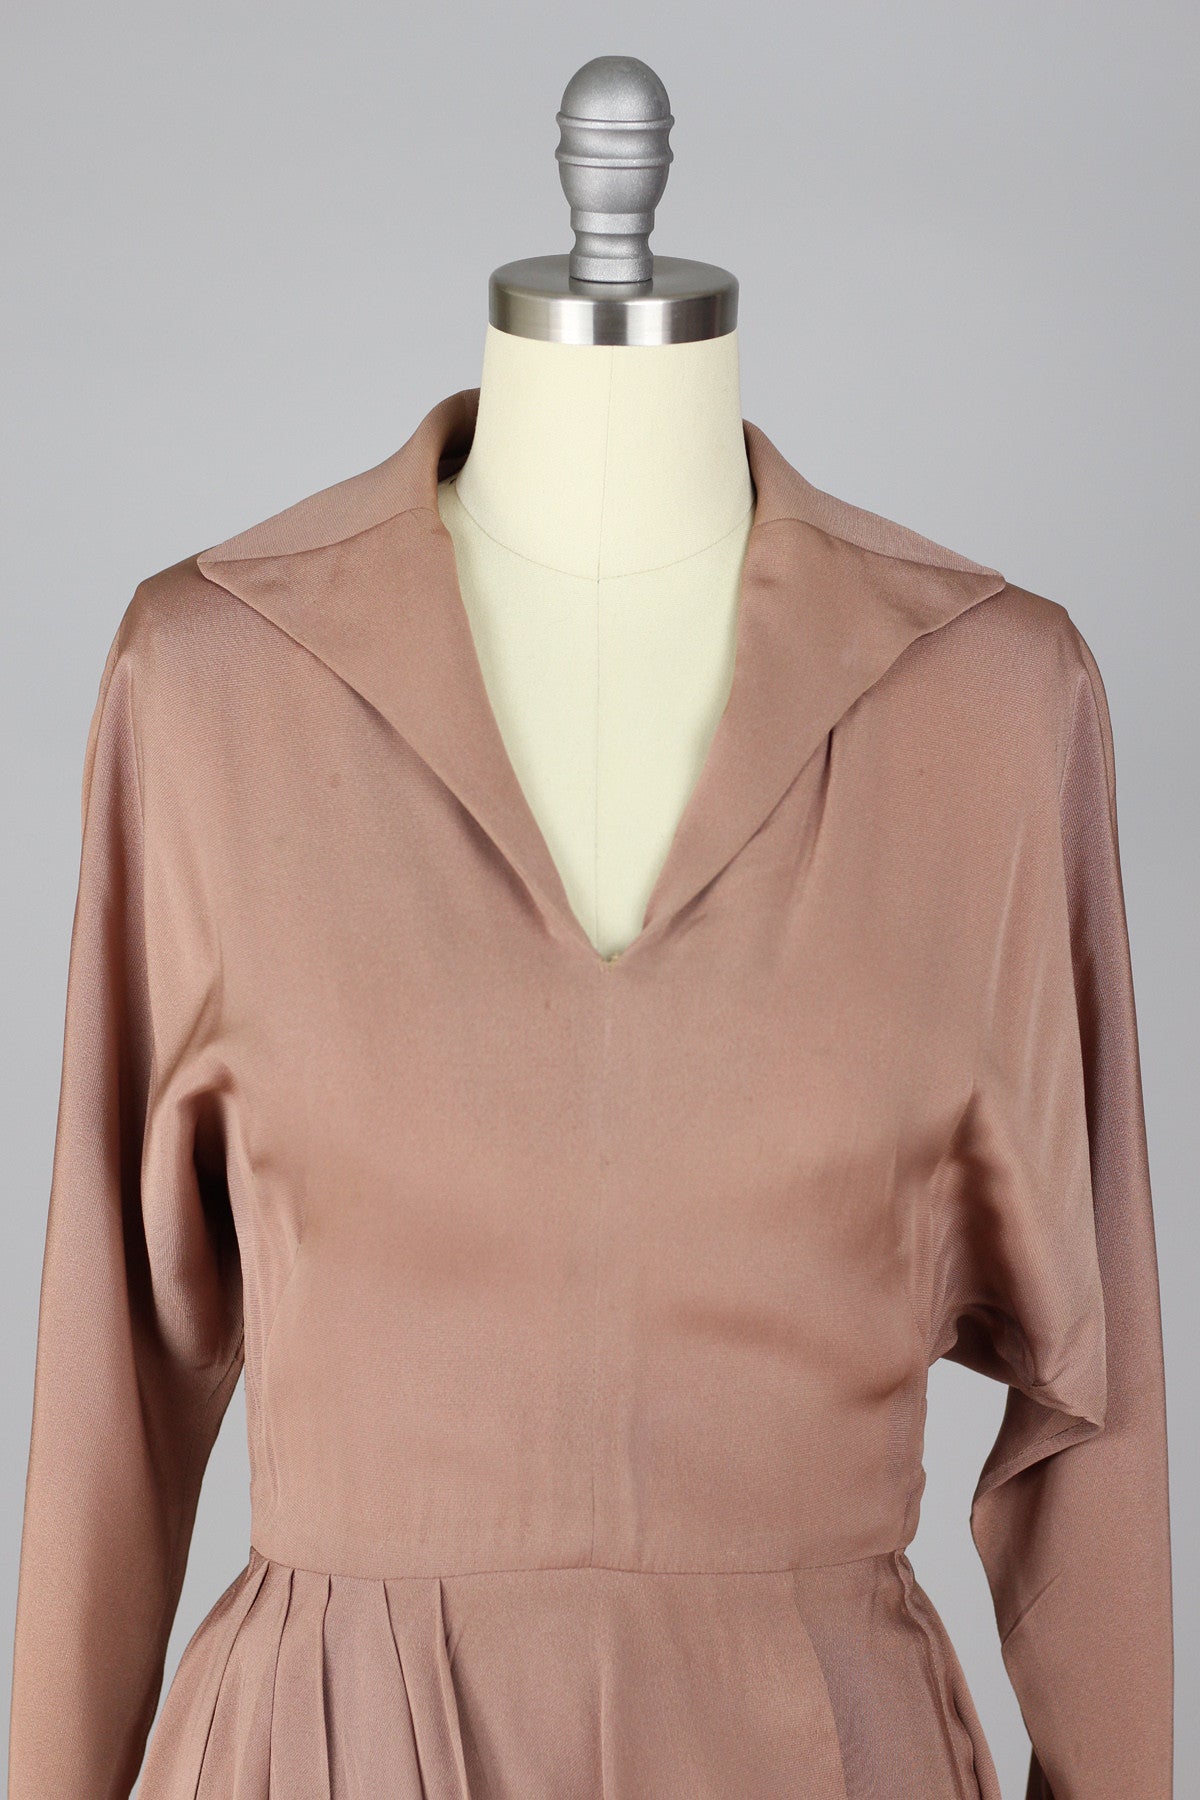 Exquisite 1940s to 1950s Rose Taupe Draped Rayon Crepe Cocktail Dress